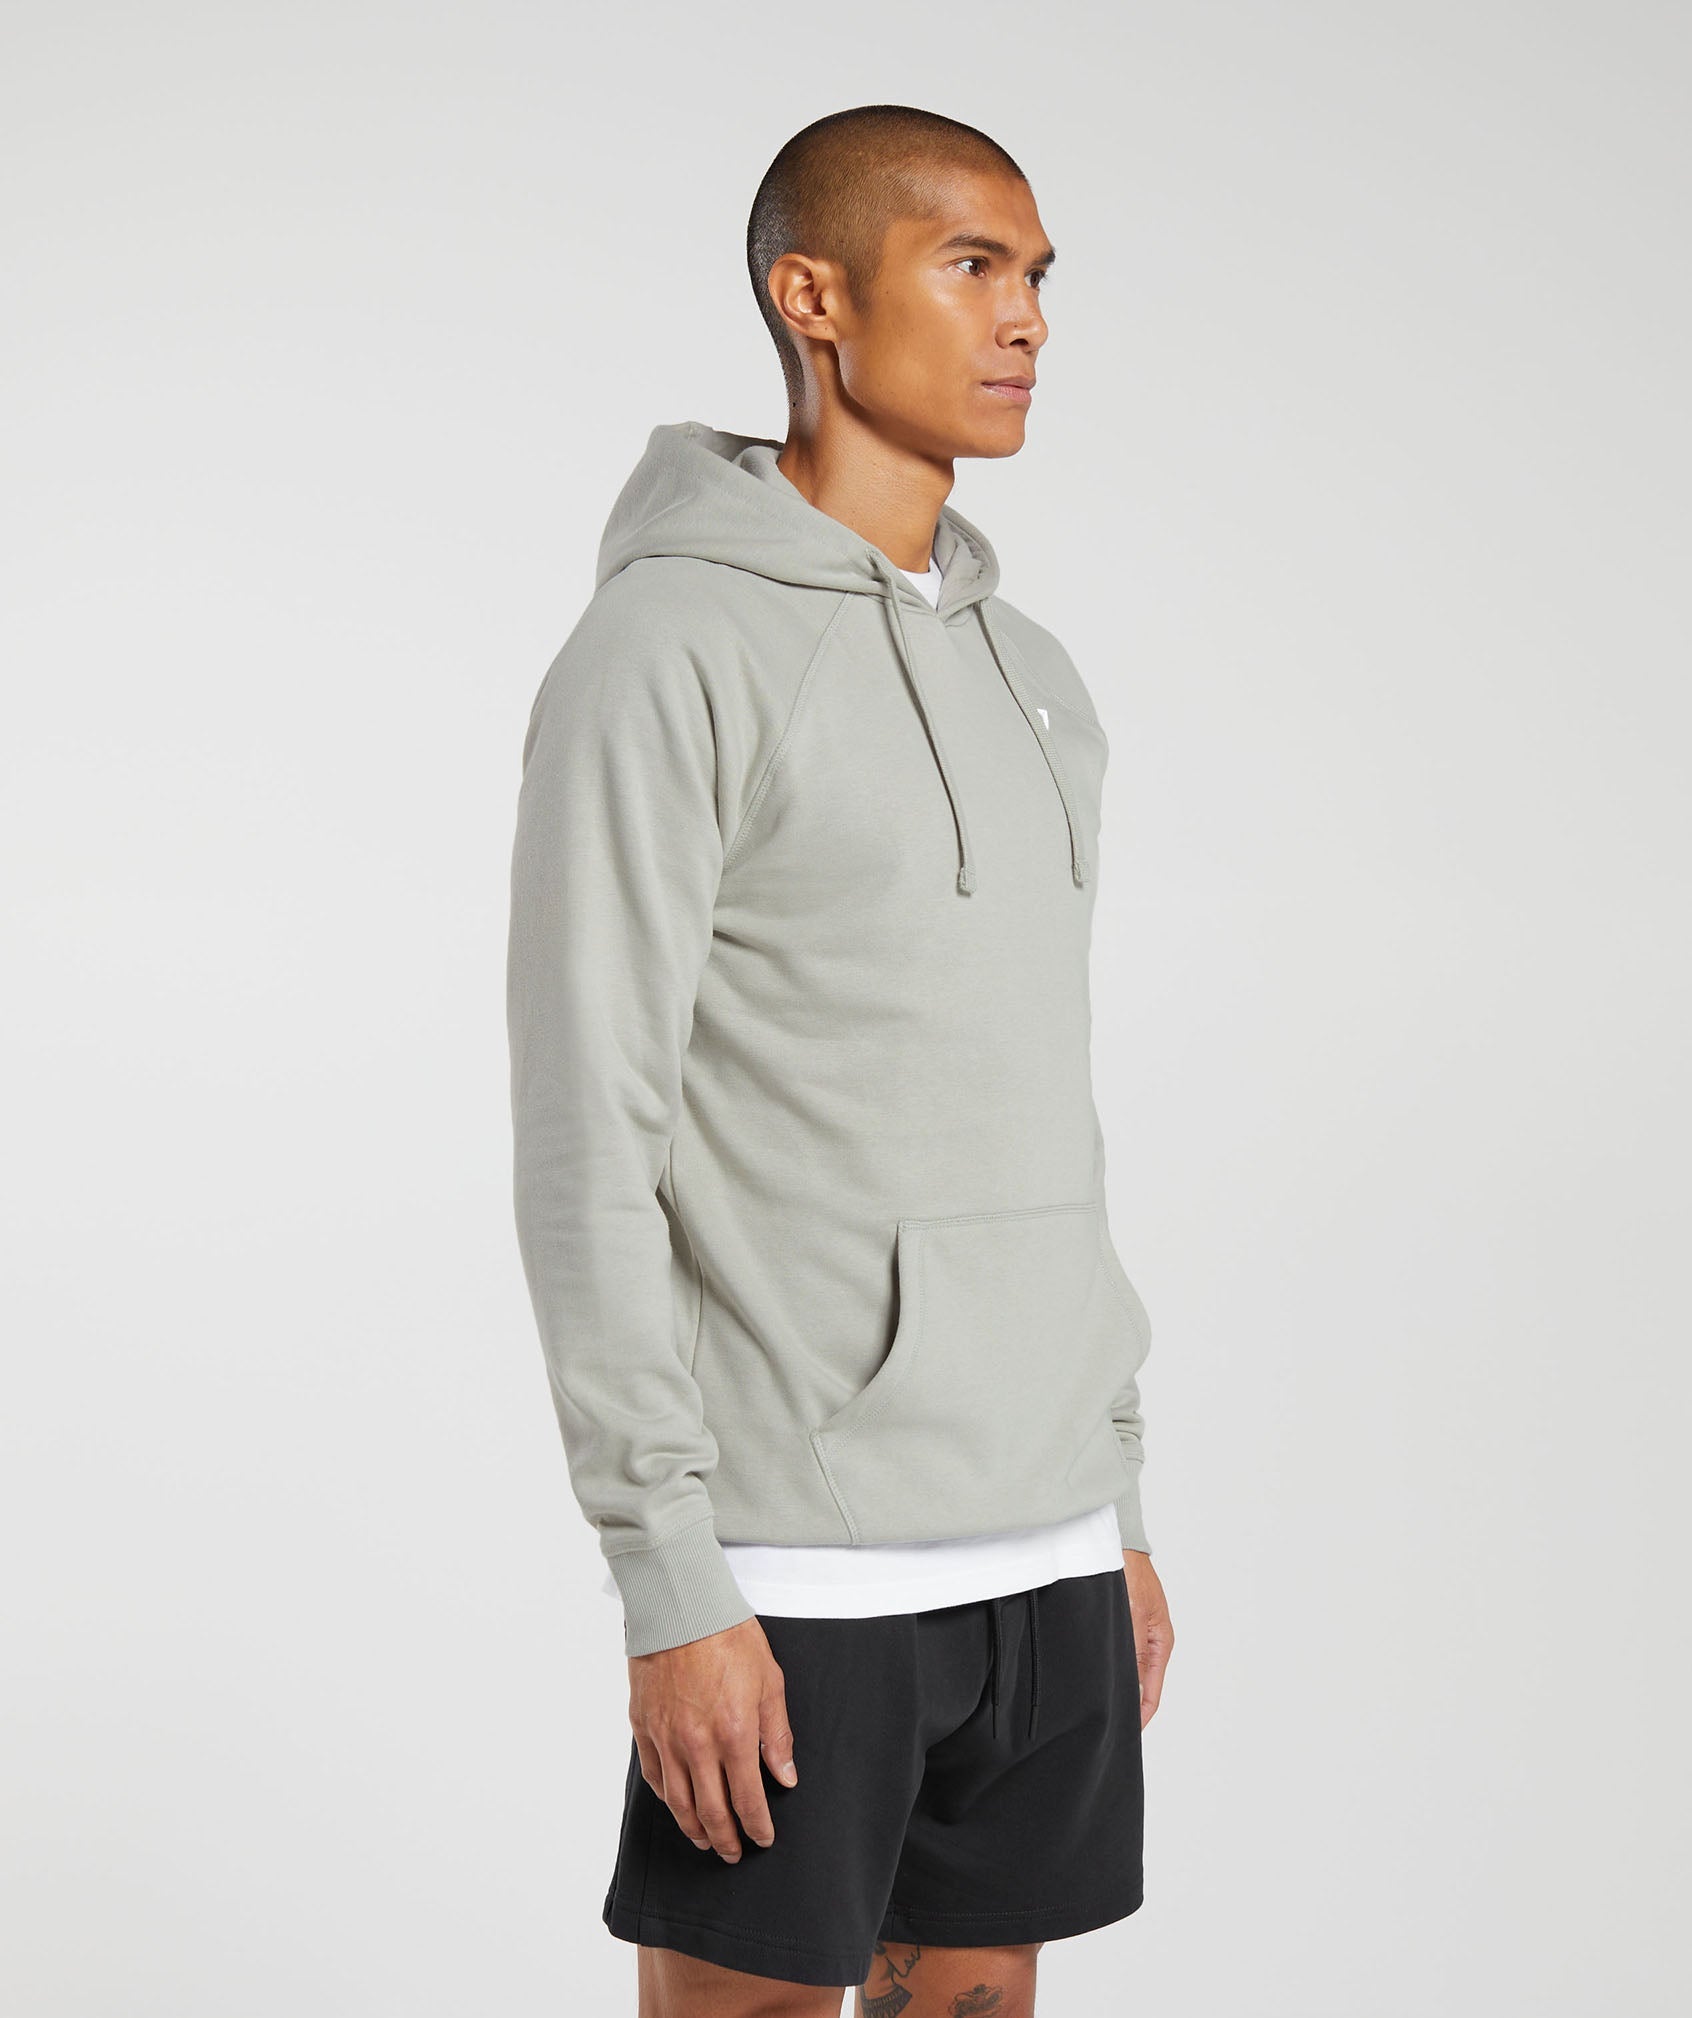 Crest Hoodie in Stone Grey - view 3